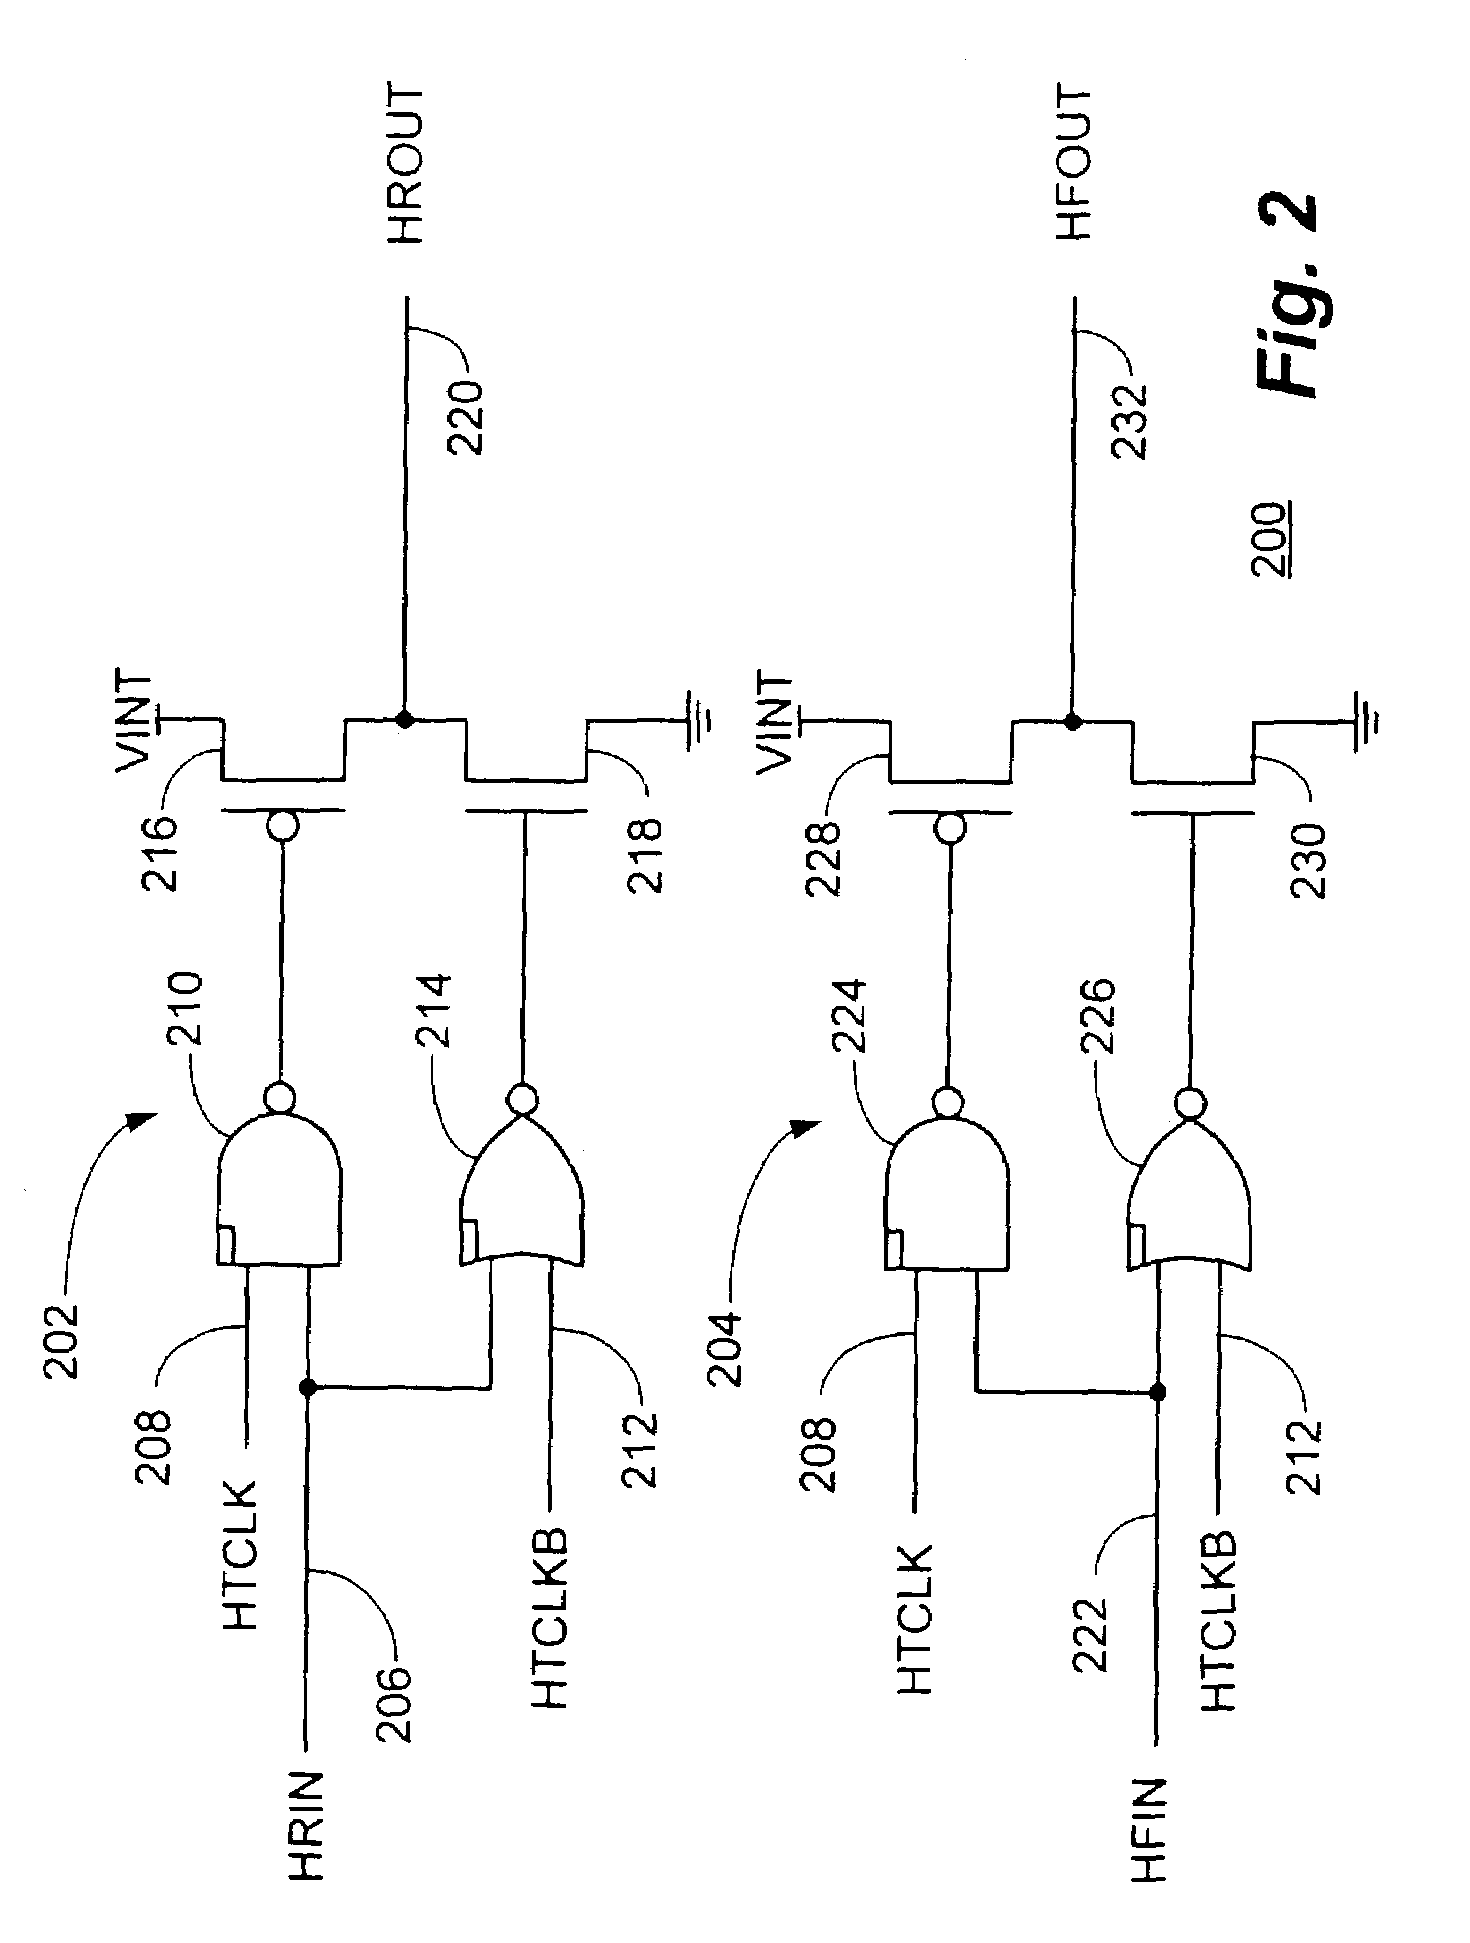 Integrated circuit memory architecture with selectively offset data and address delays to minimize skew and provide synchronization of signals at the input/output section